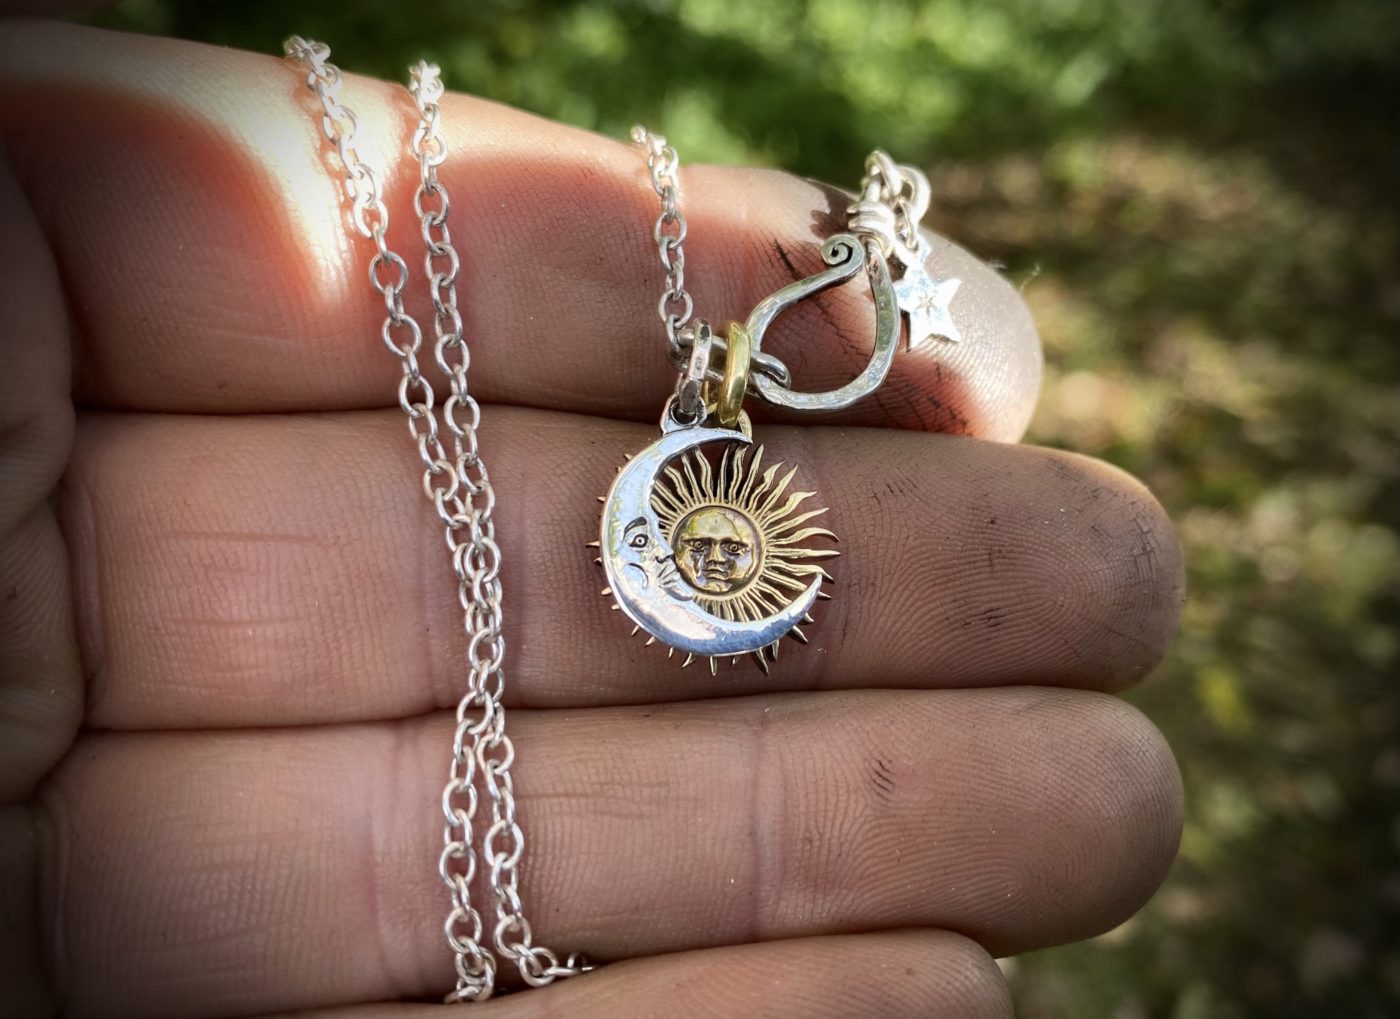 sun and moon jewellery made from old coins unique to hairy growler